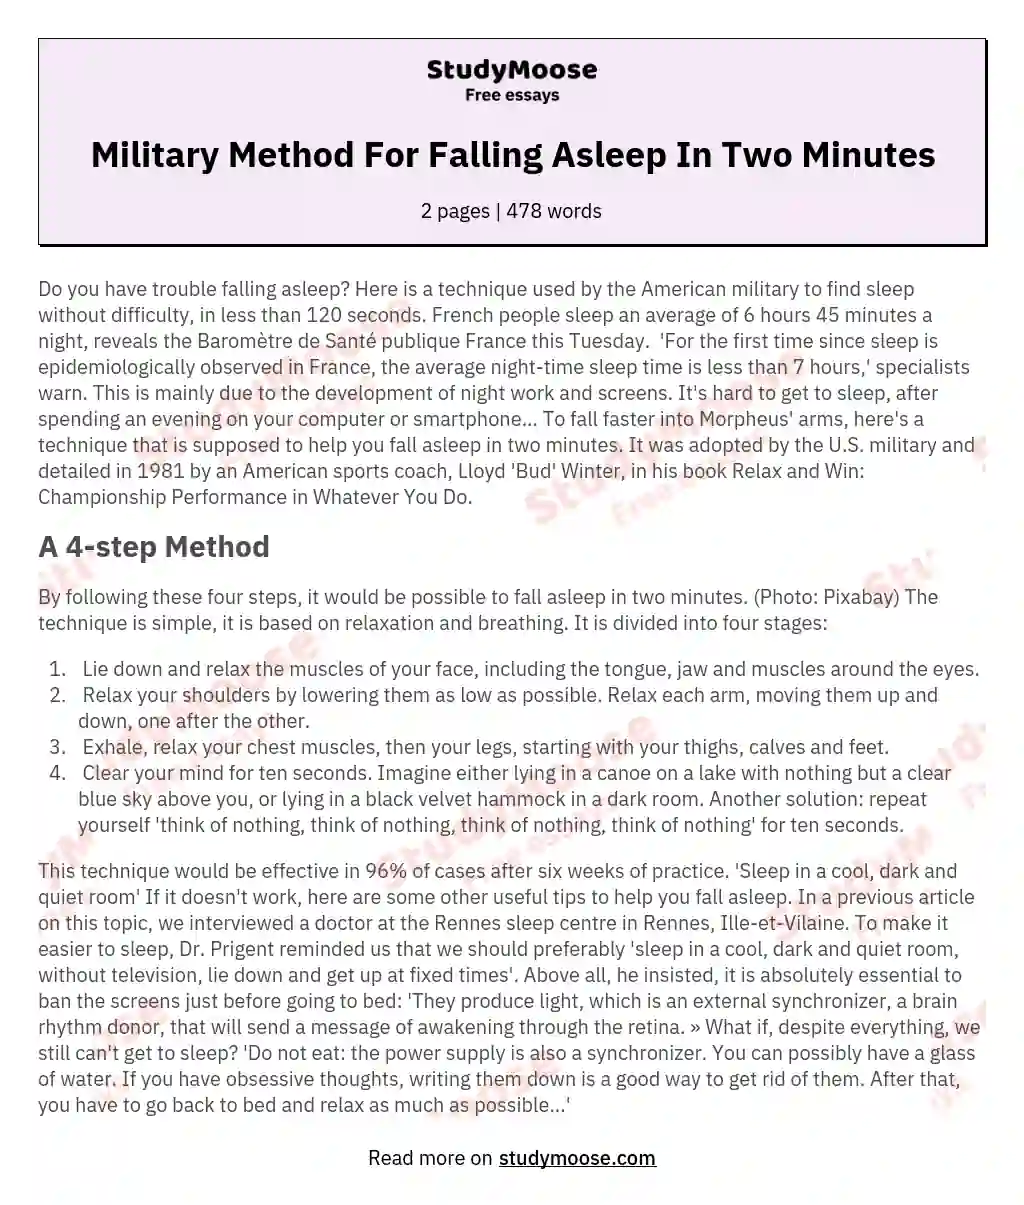 Military Method For Falling Asleep In Two Minutes